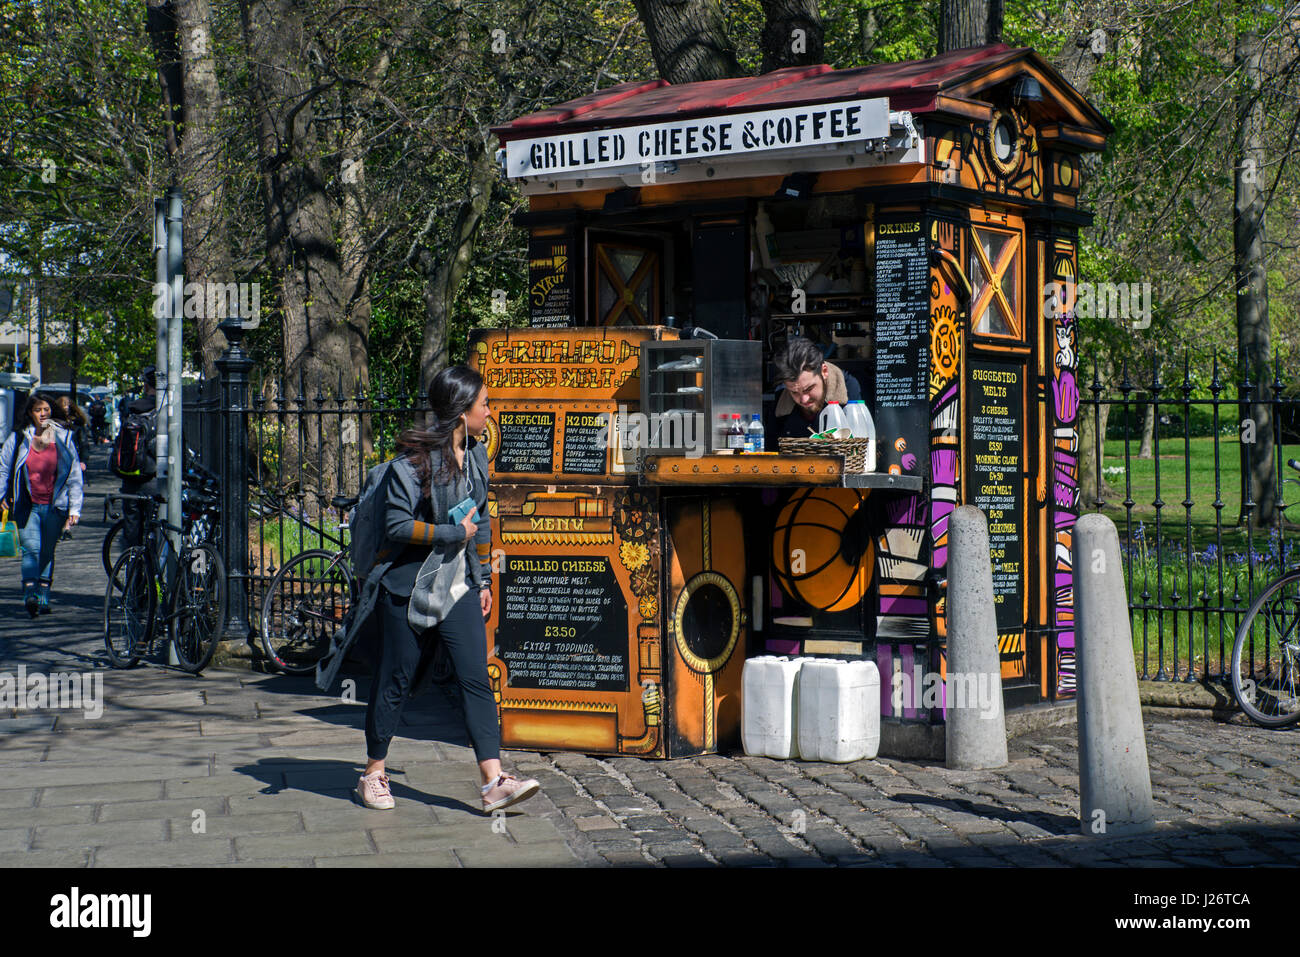 Police box in Edinburgh which has been converted into a Grilled Cheese and Coffee stall. Stock Photo